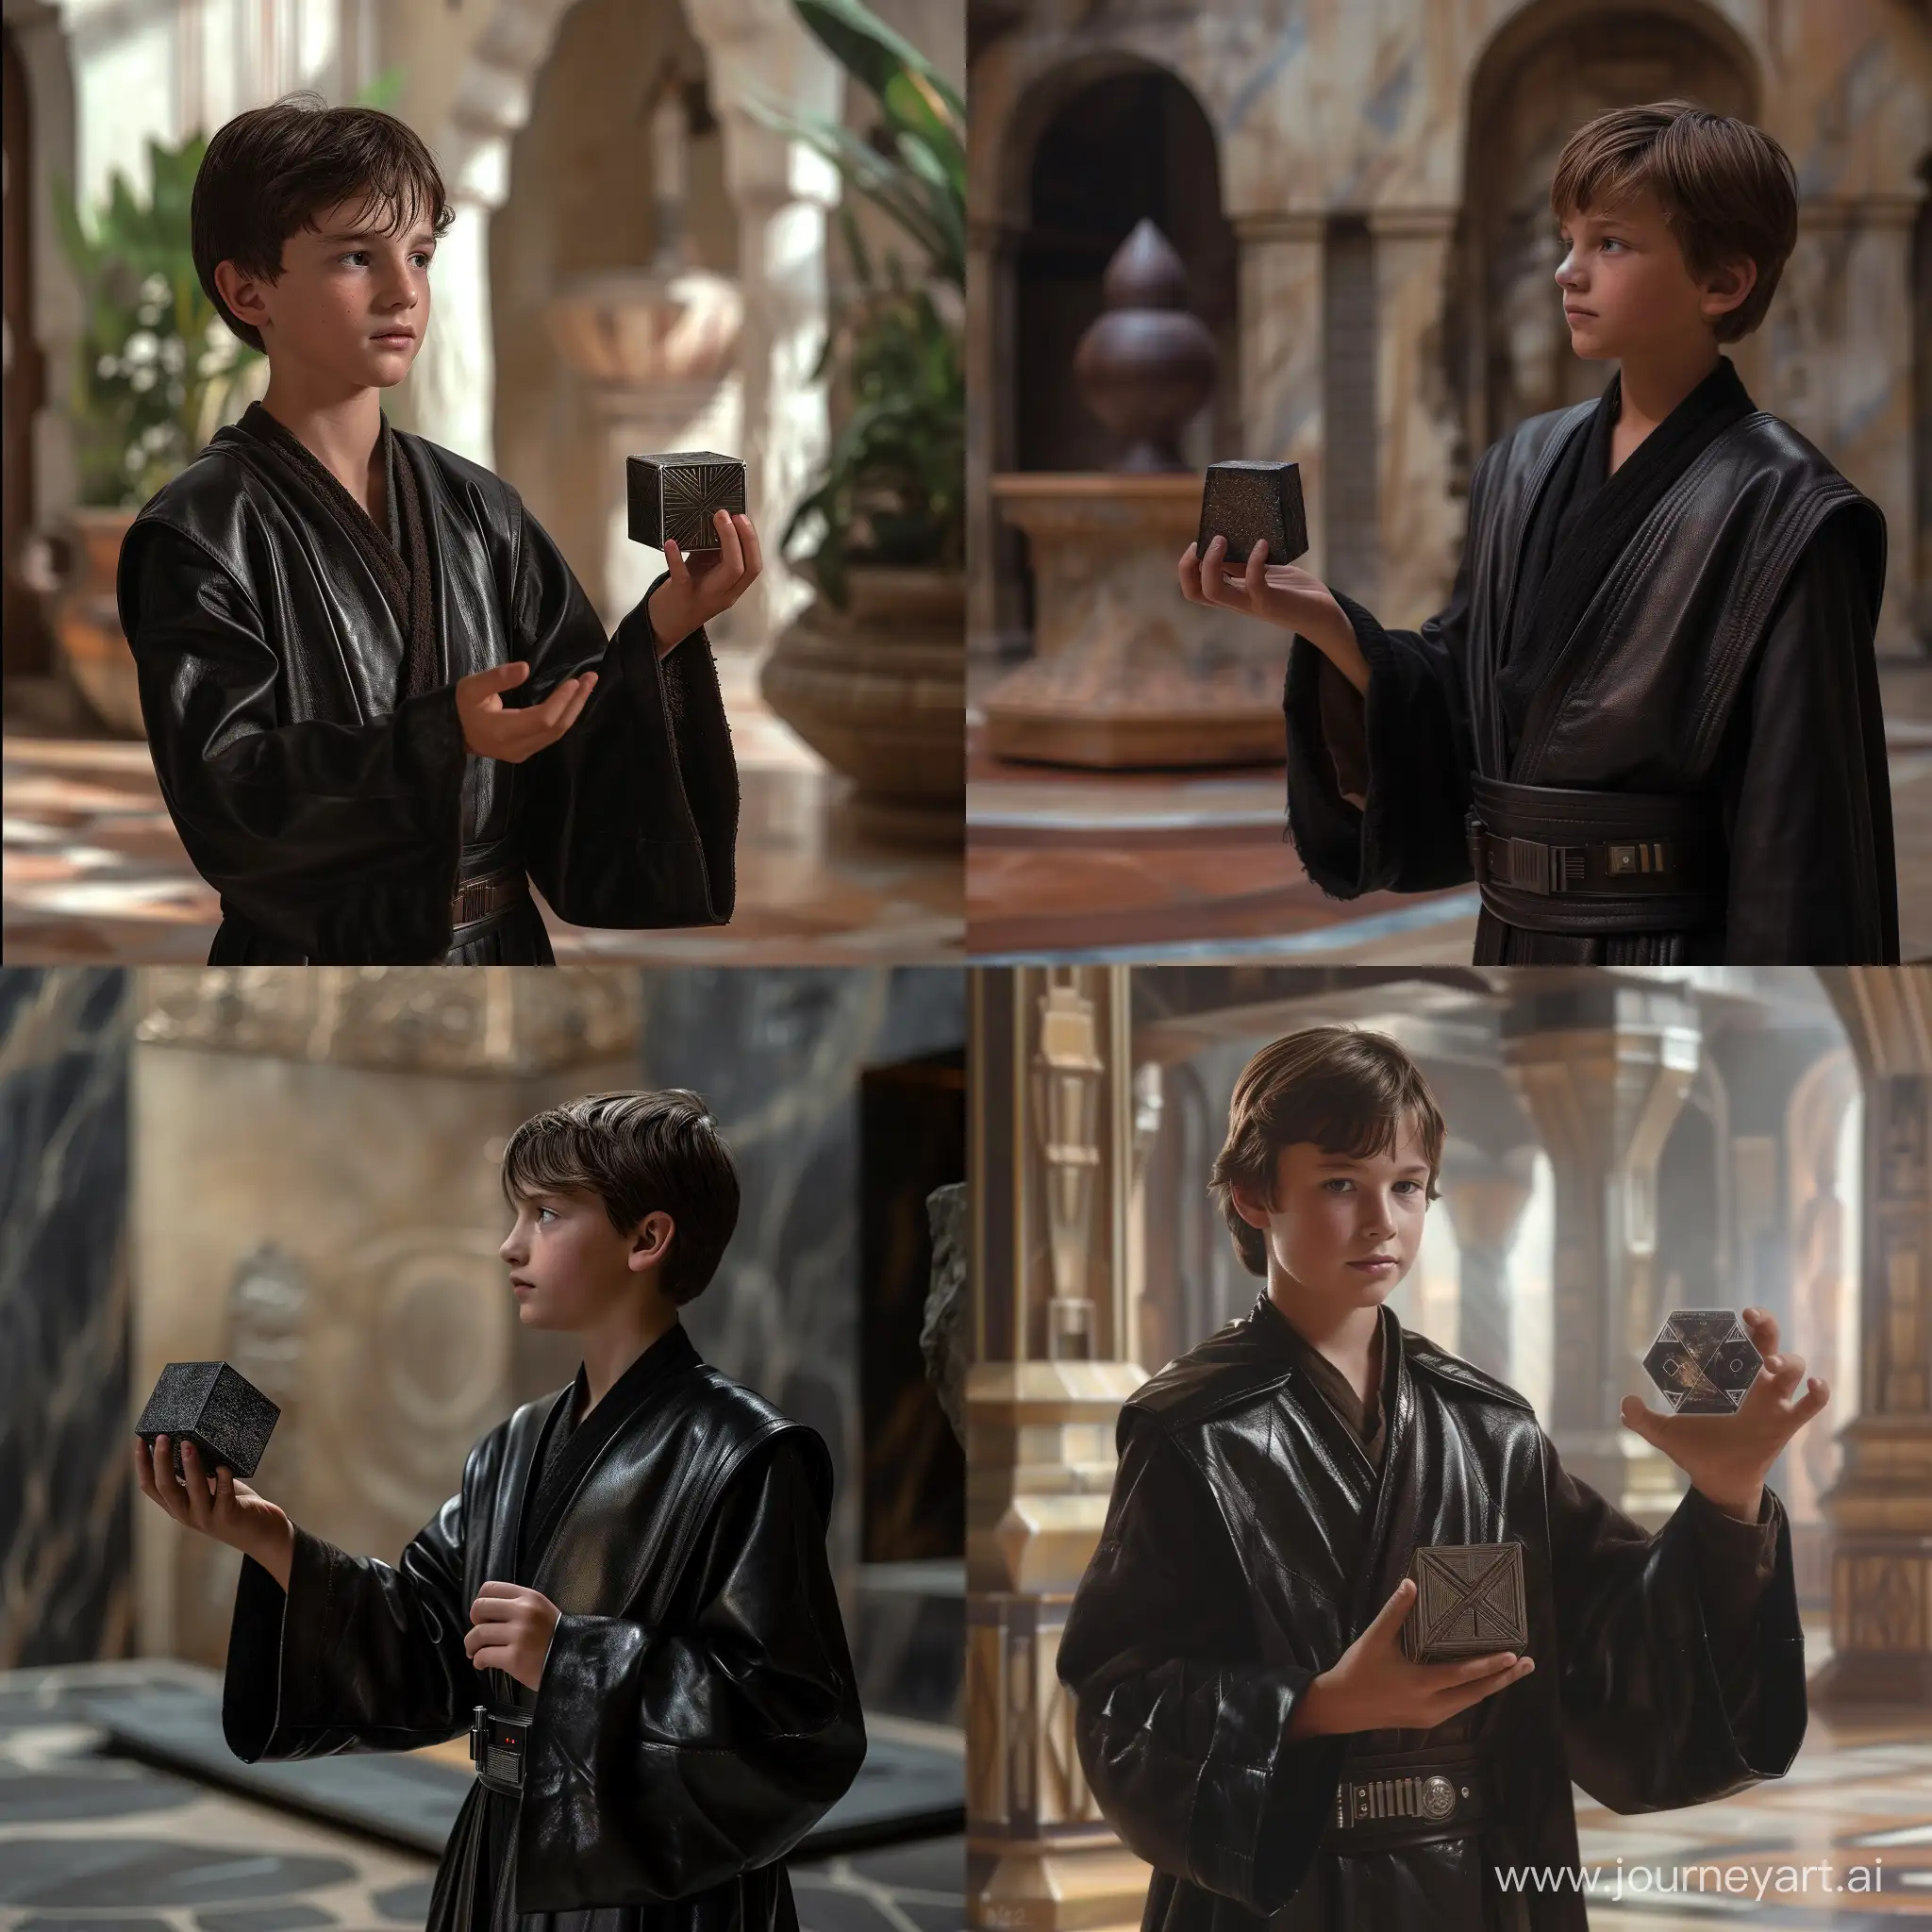 A 12-year-old boy in a black leather Jedi robe, in the Jedi temple, holds a cube (holocron) in his hand